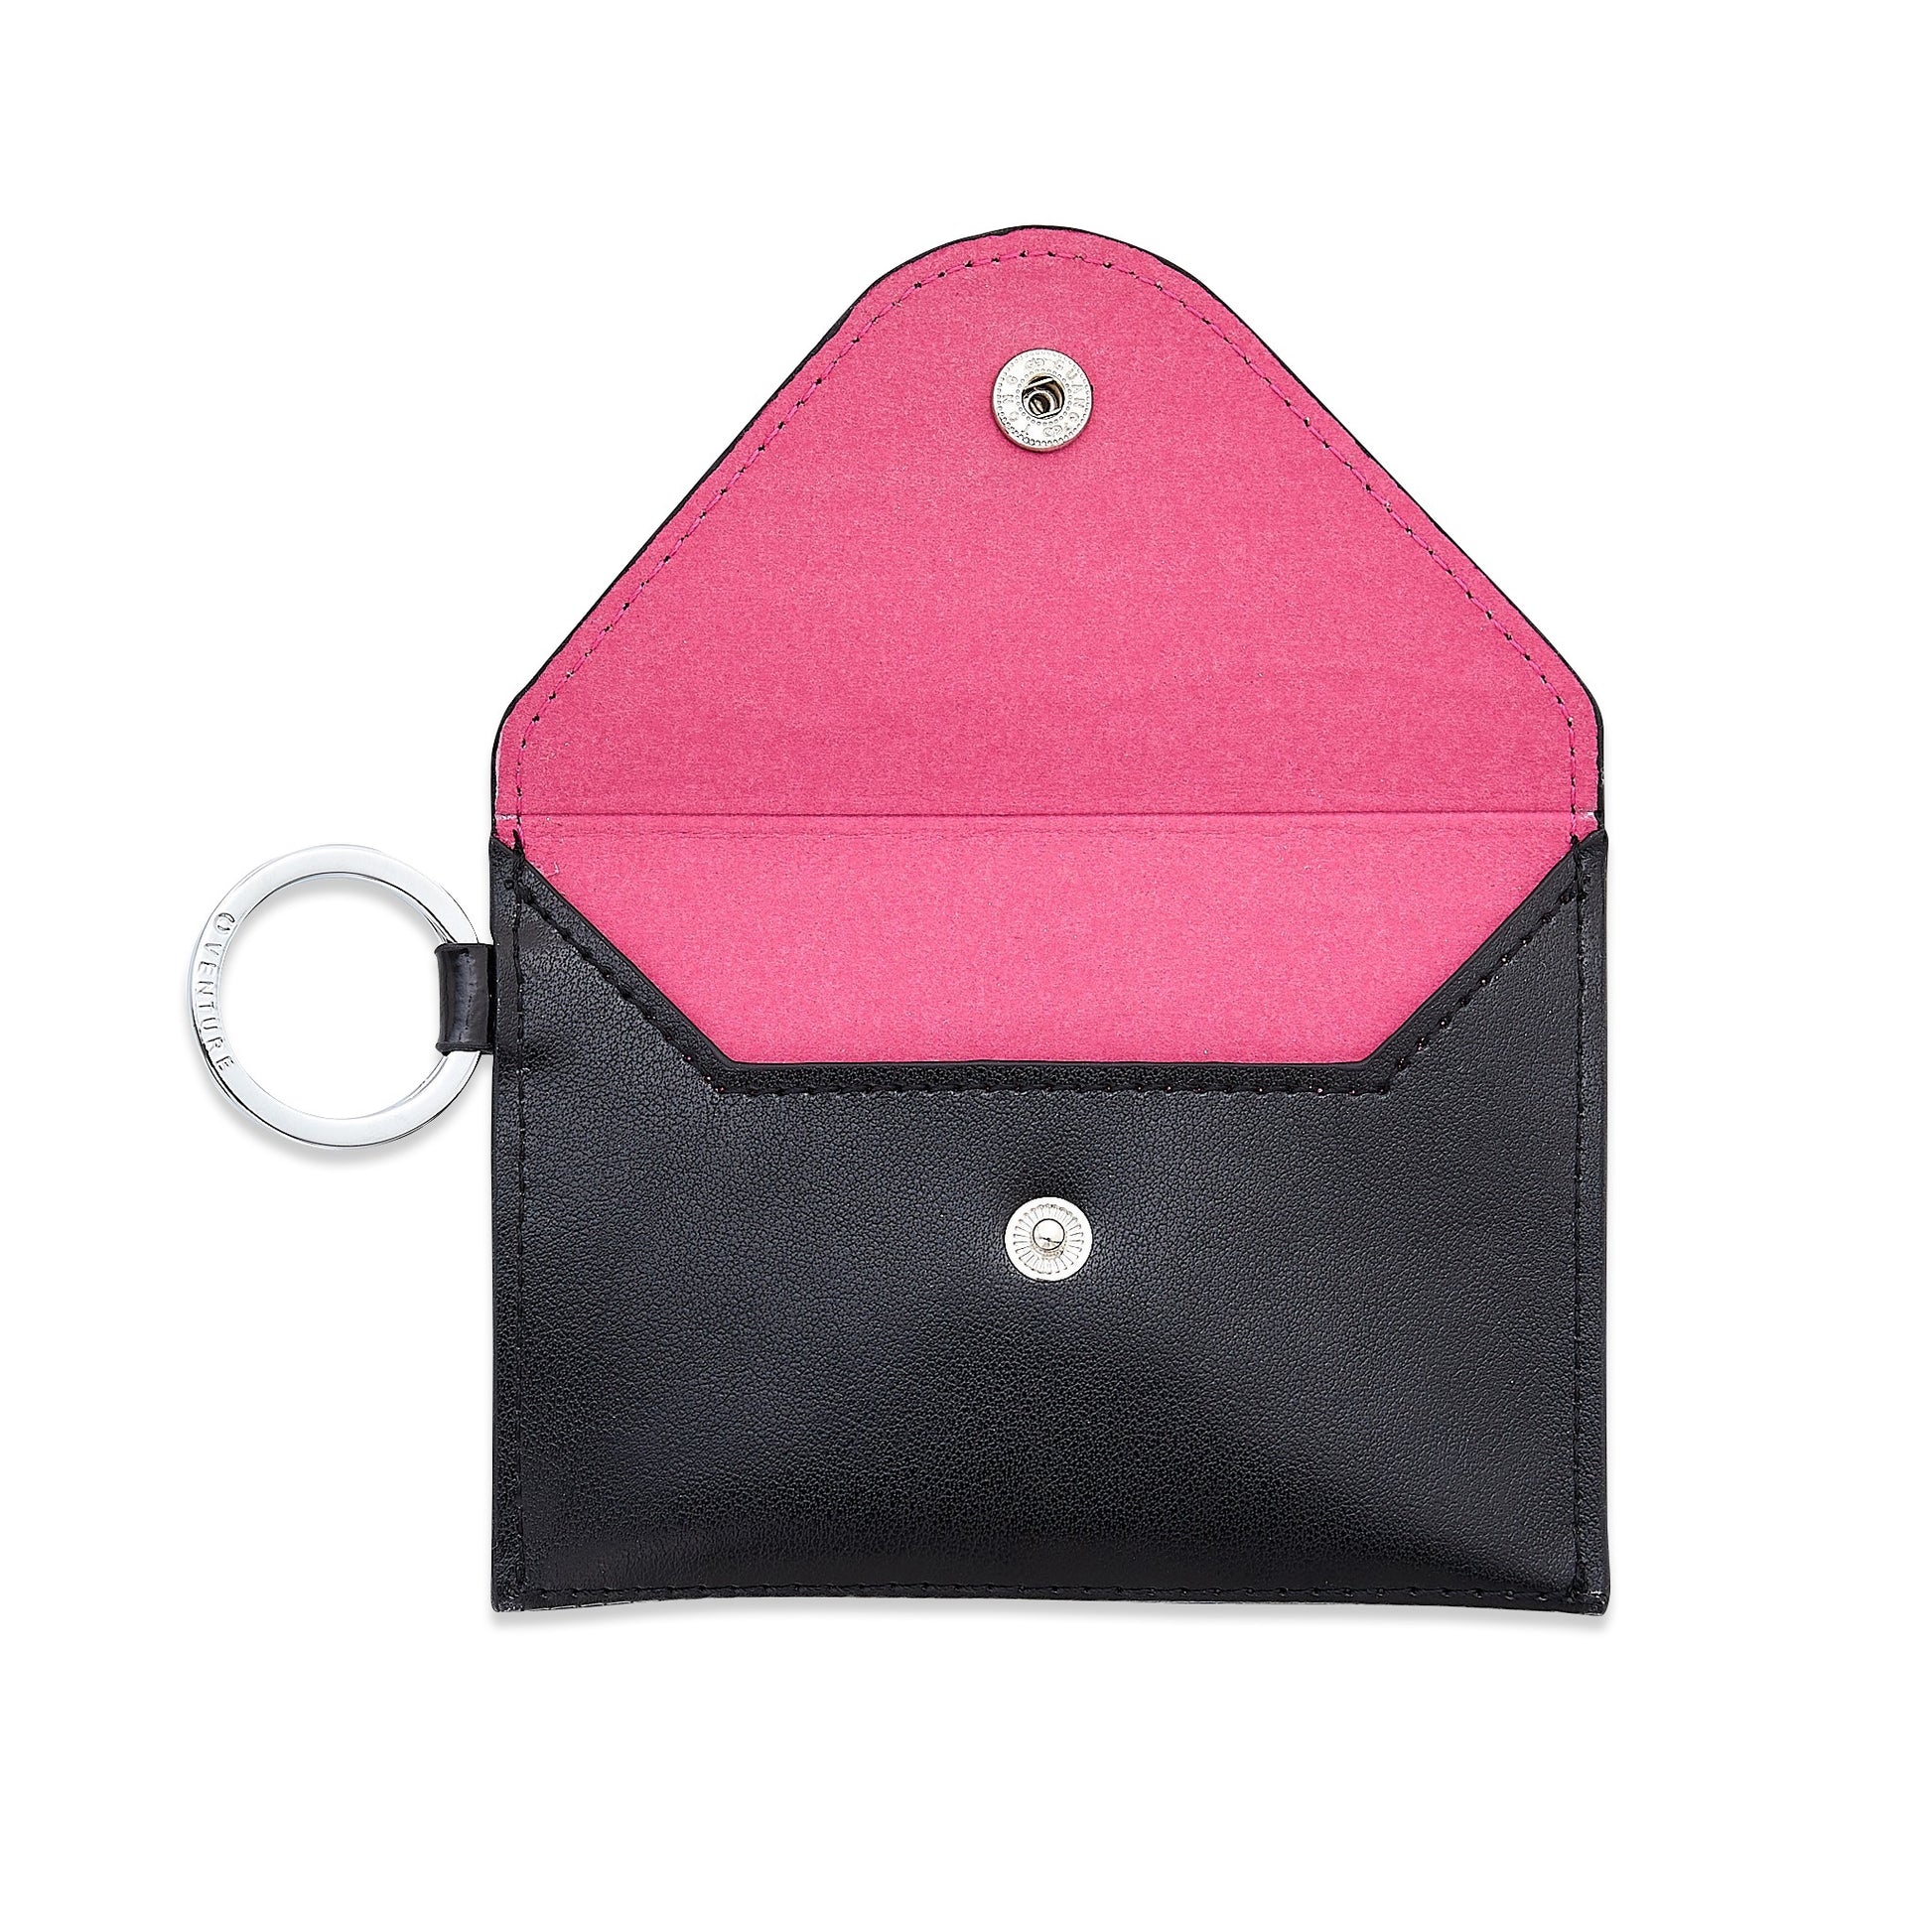 Black leather keychain wallet in mini envelope style - Oventure with hot pink microfiber liner